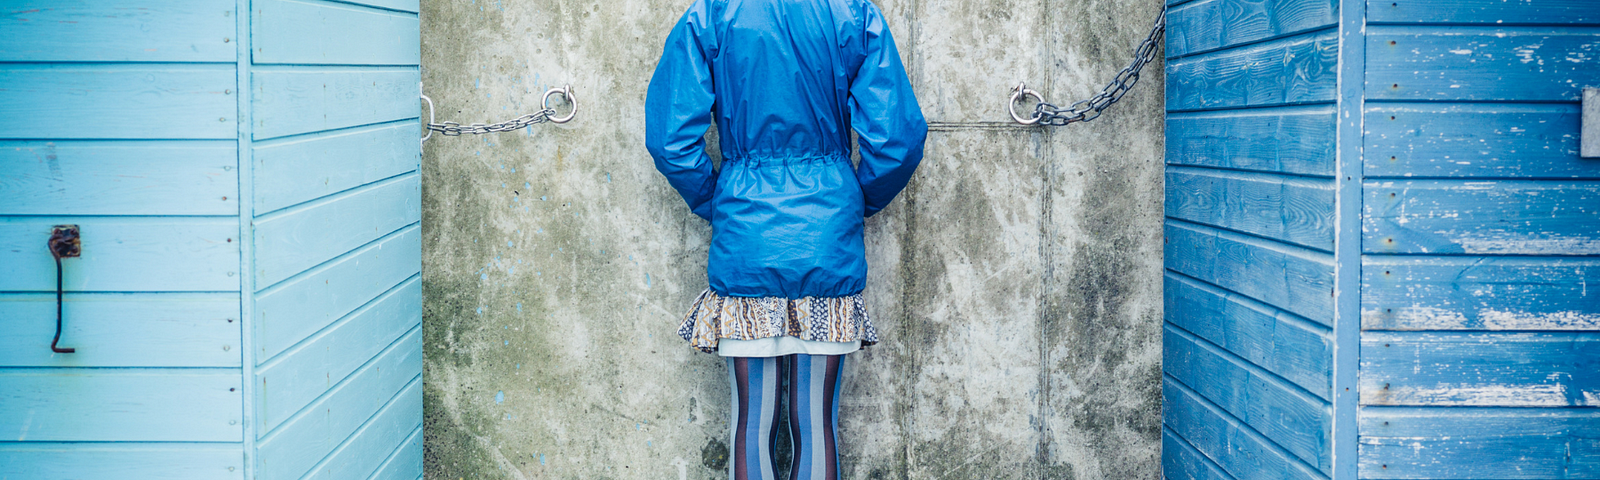 A person wearing a blue windbreaker with hands in pockets has their back turned to us and stands against a concrete wall. Two blue wooden structures are on either side of them.